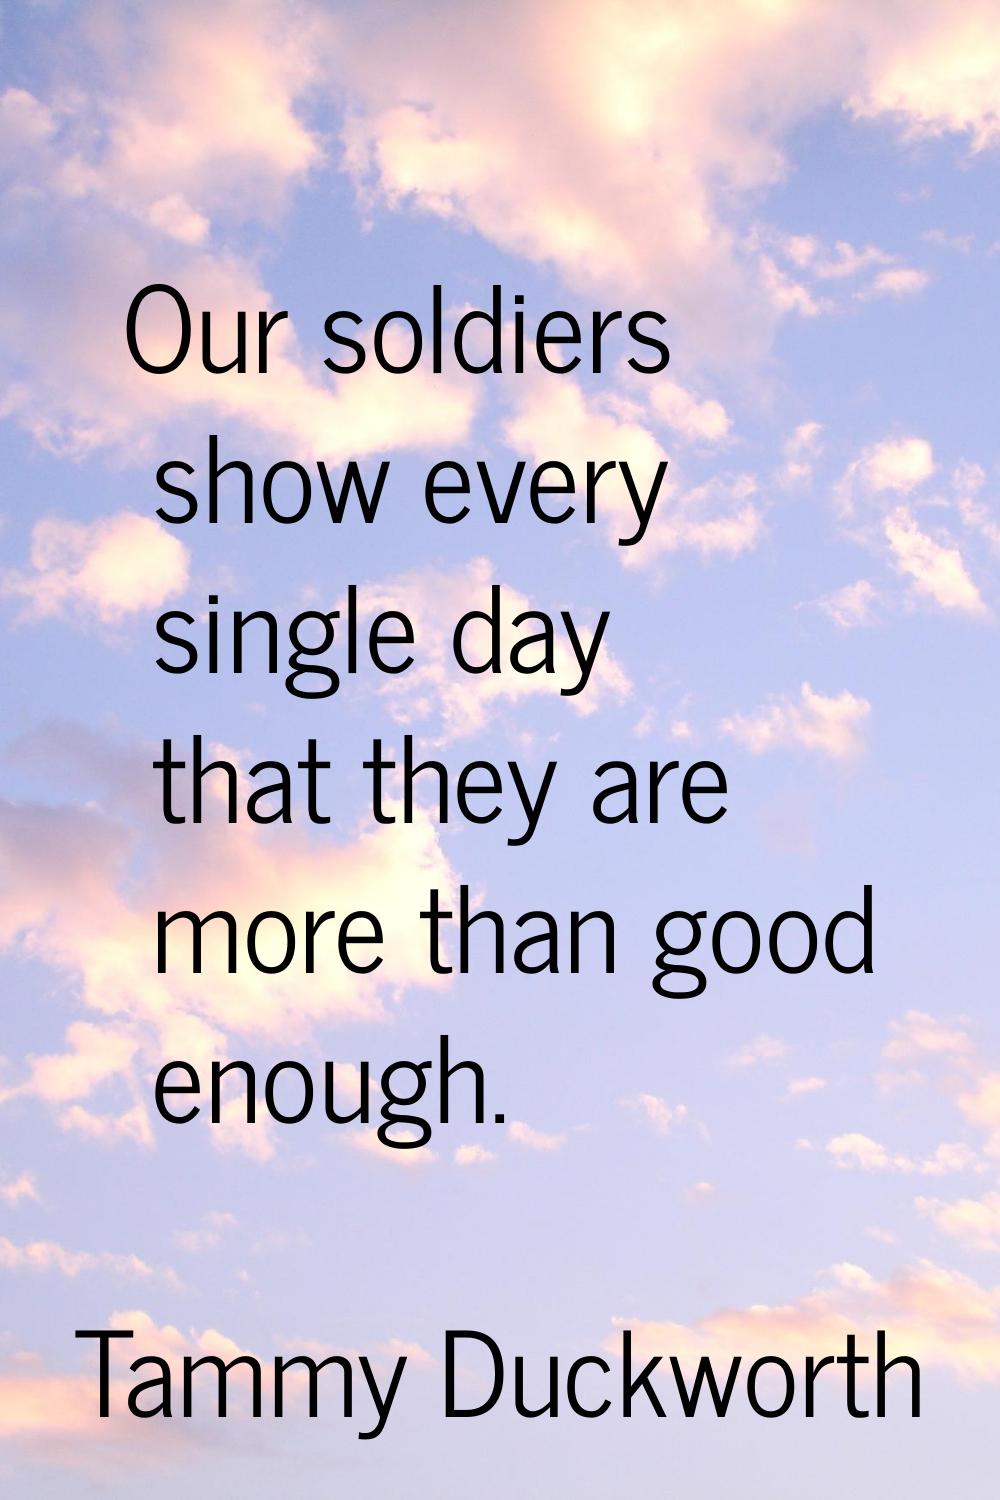 Our soldiers show every single day that they are more than good enough.